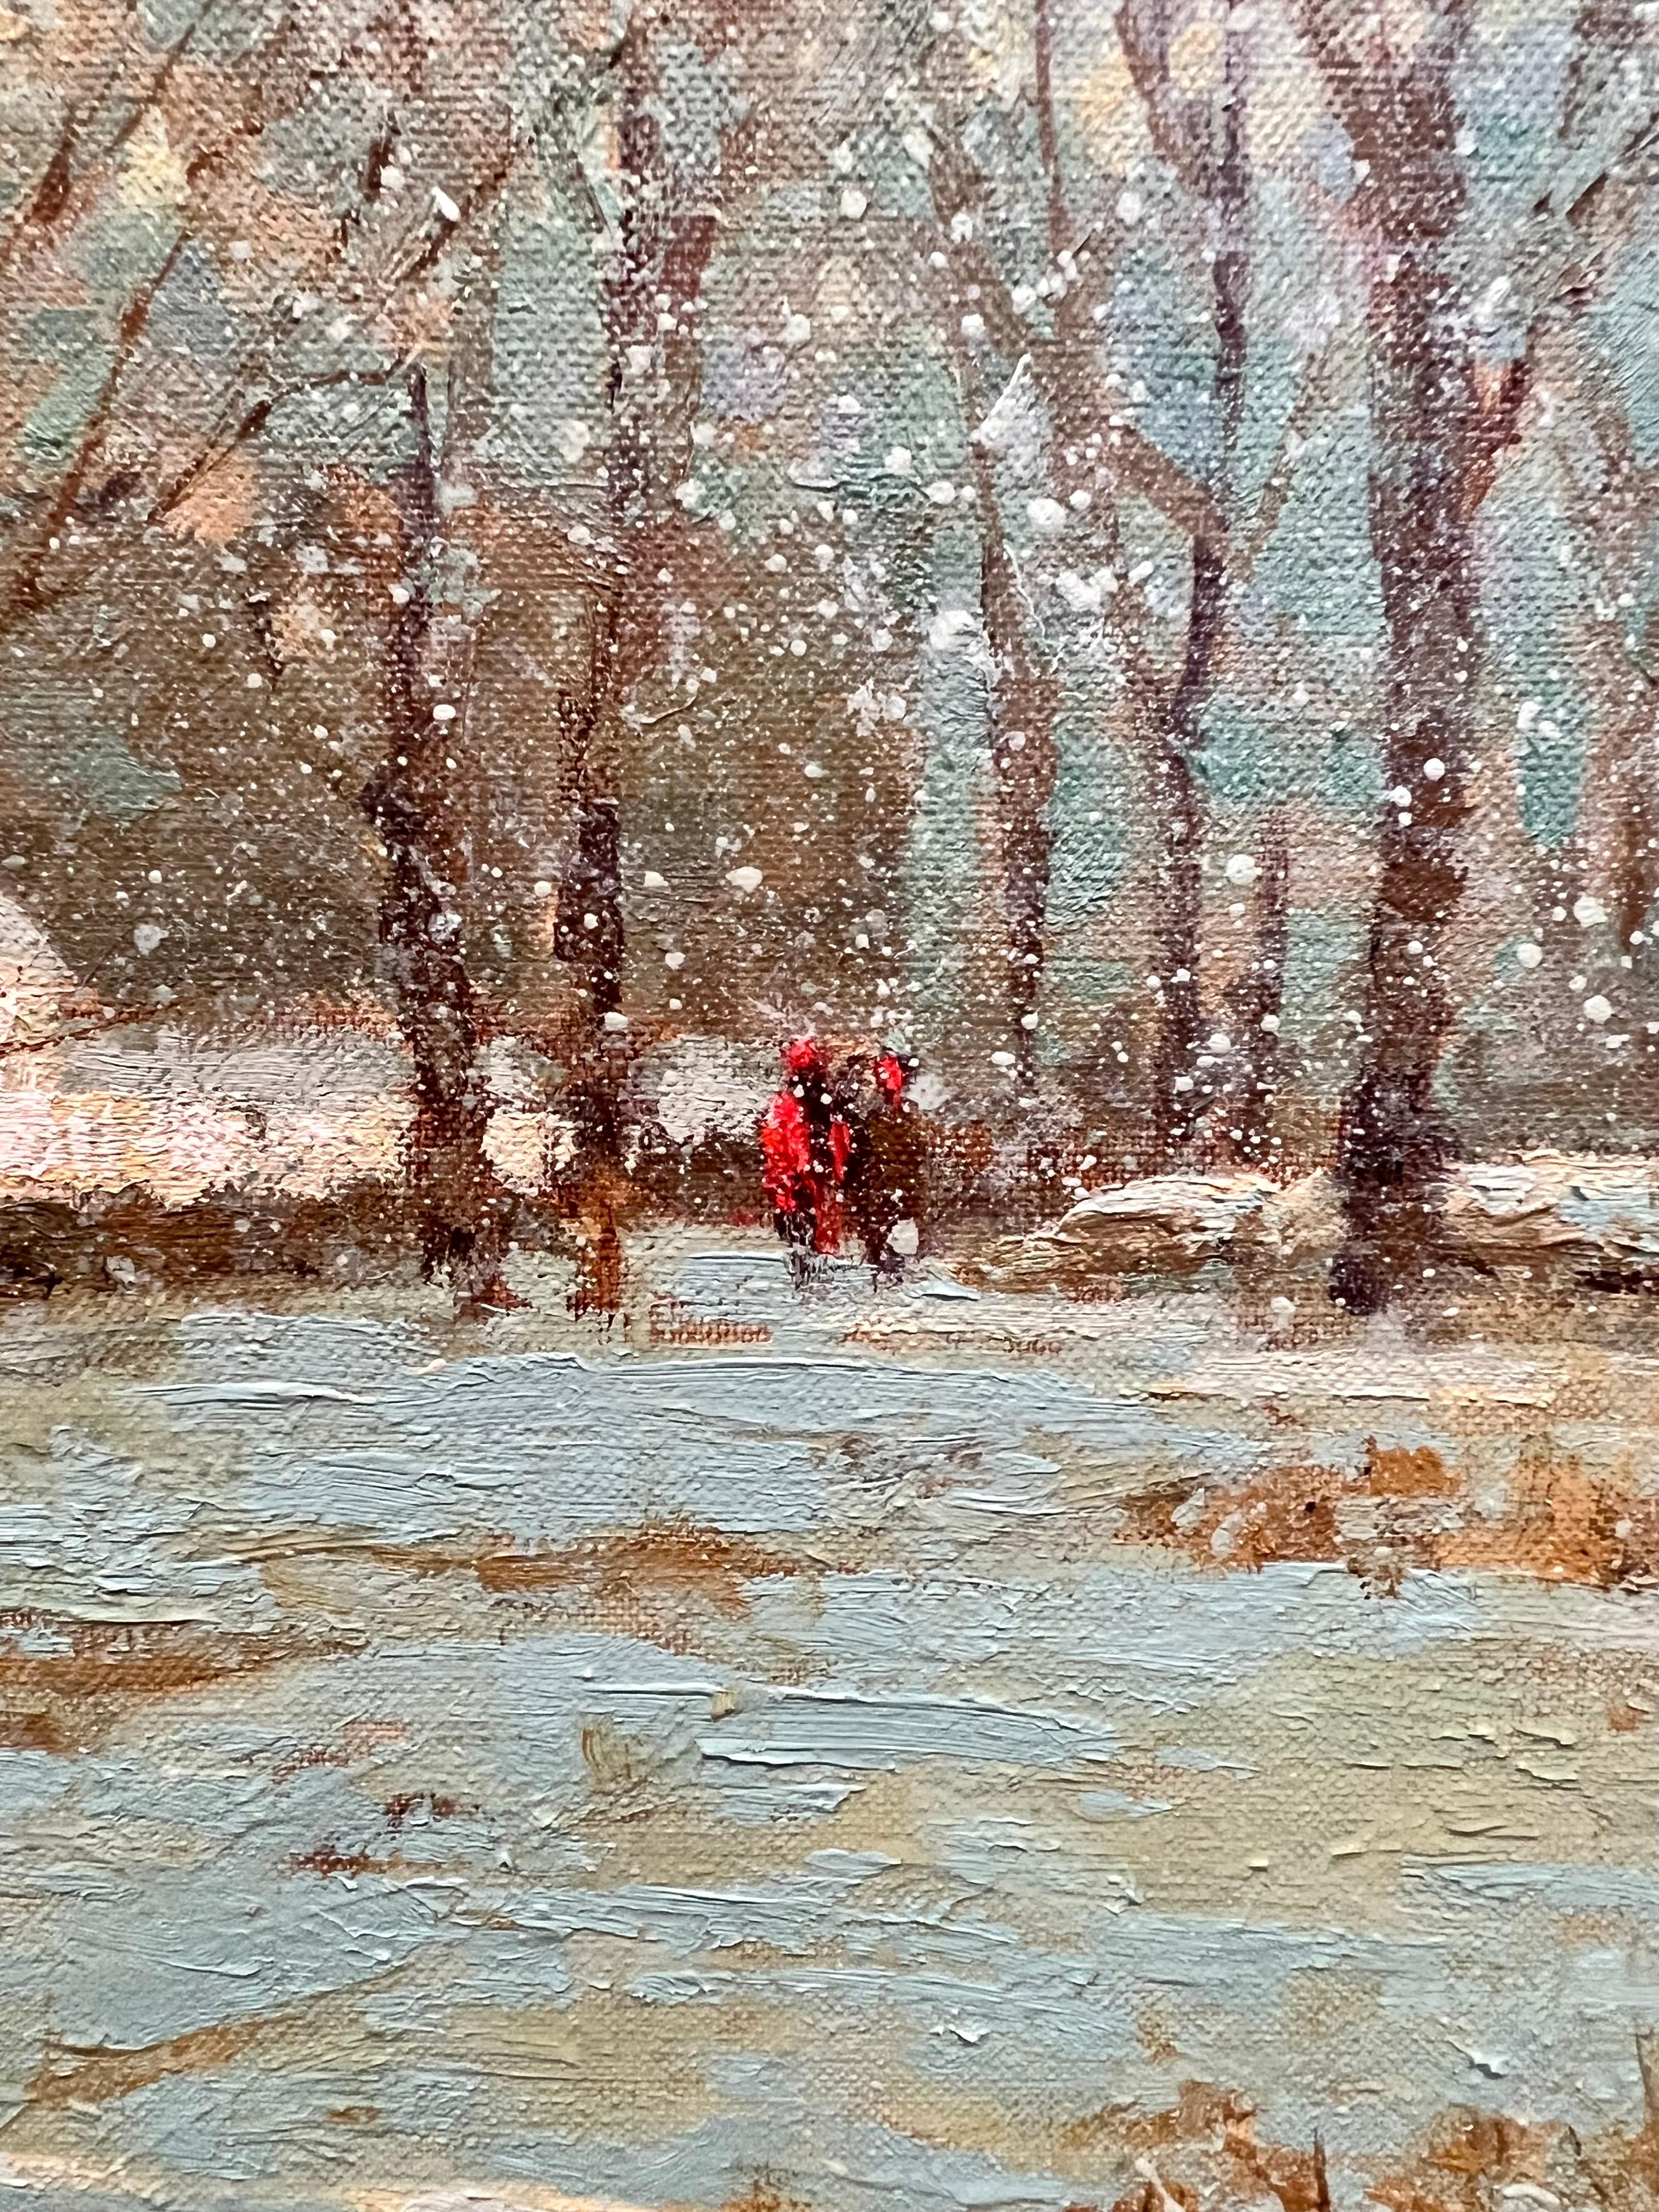 Step into the serene world of winter through Deborah Cotrone's masterful brushstrokes. In her impressionist oil painting, a snow-covered landscape comes alive with the soft play of light and shadow. With delicate strokes, Cotrone captures the hushed